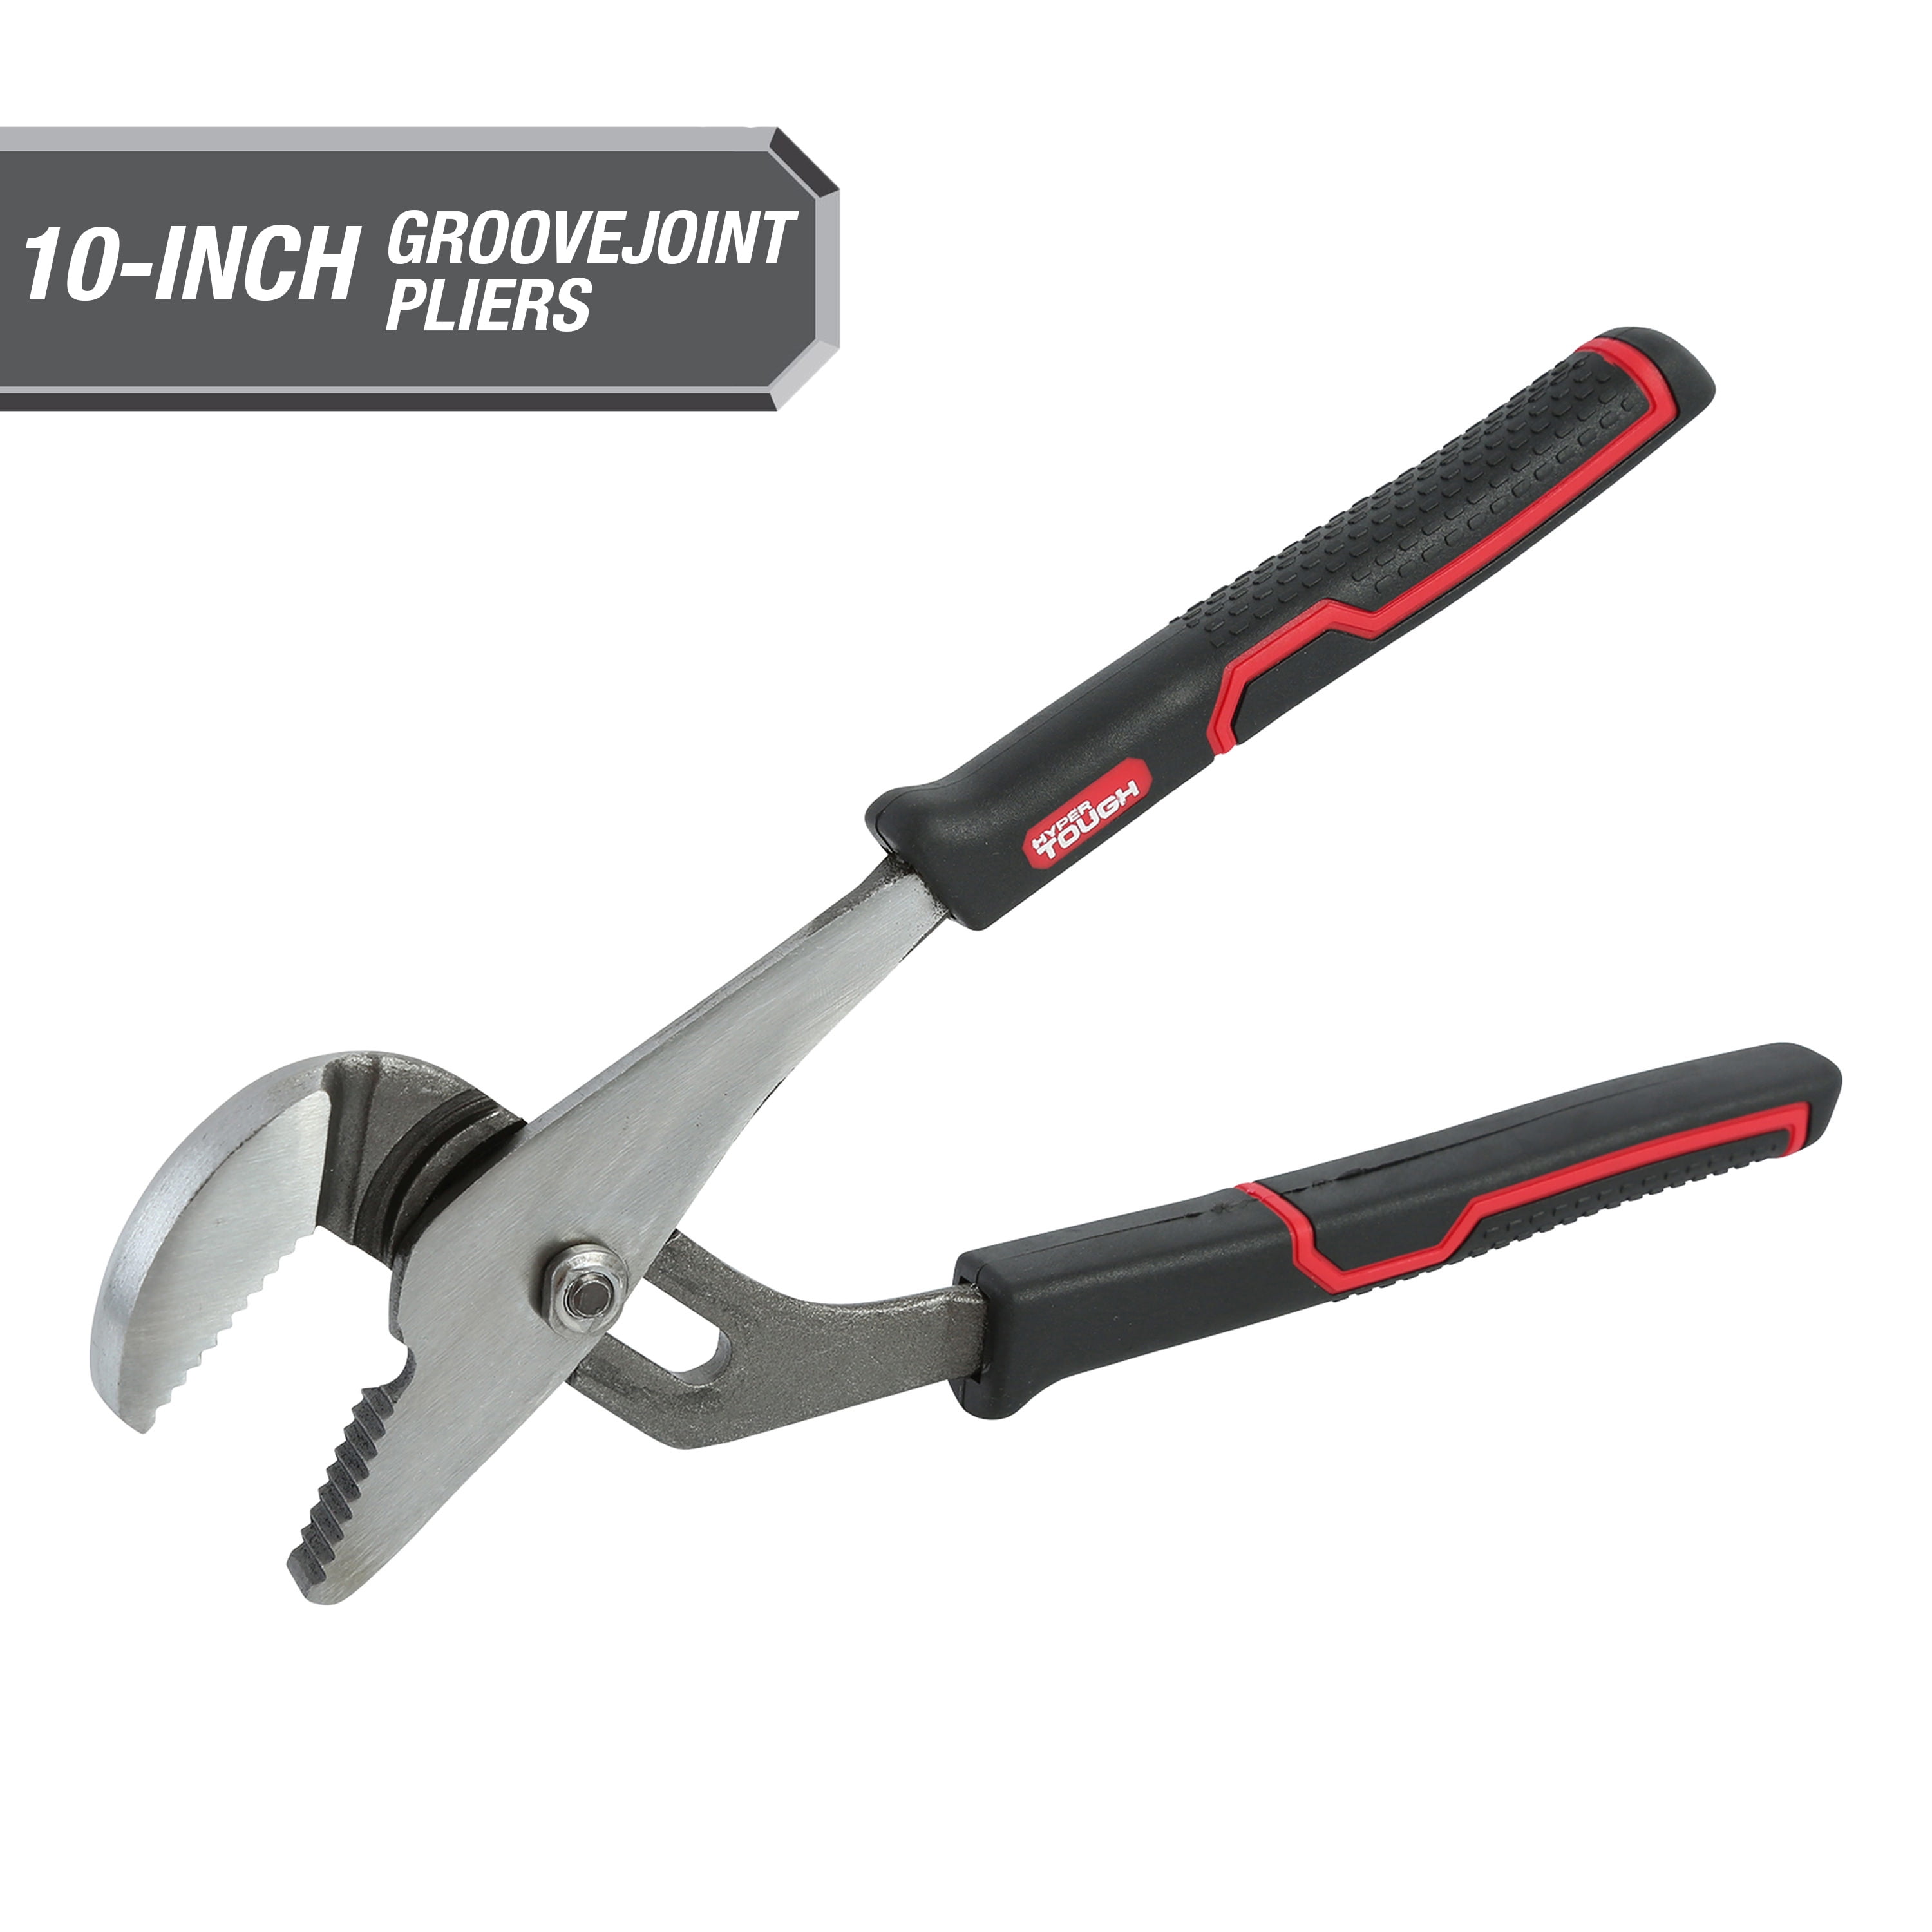 Hyper Tough 10-inch Groove Joint Pliers with Ergonomic Comfort Grips